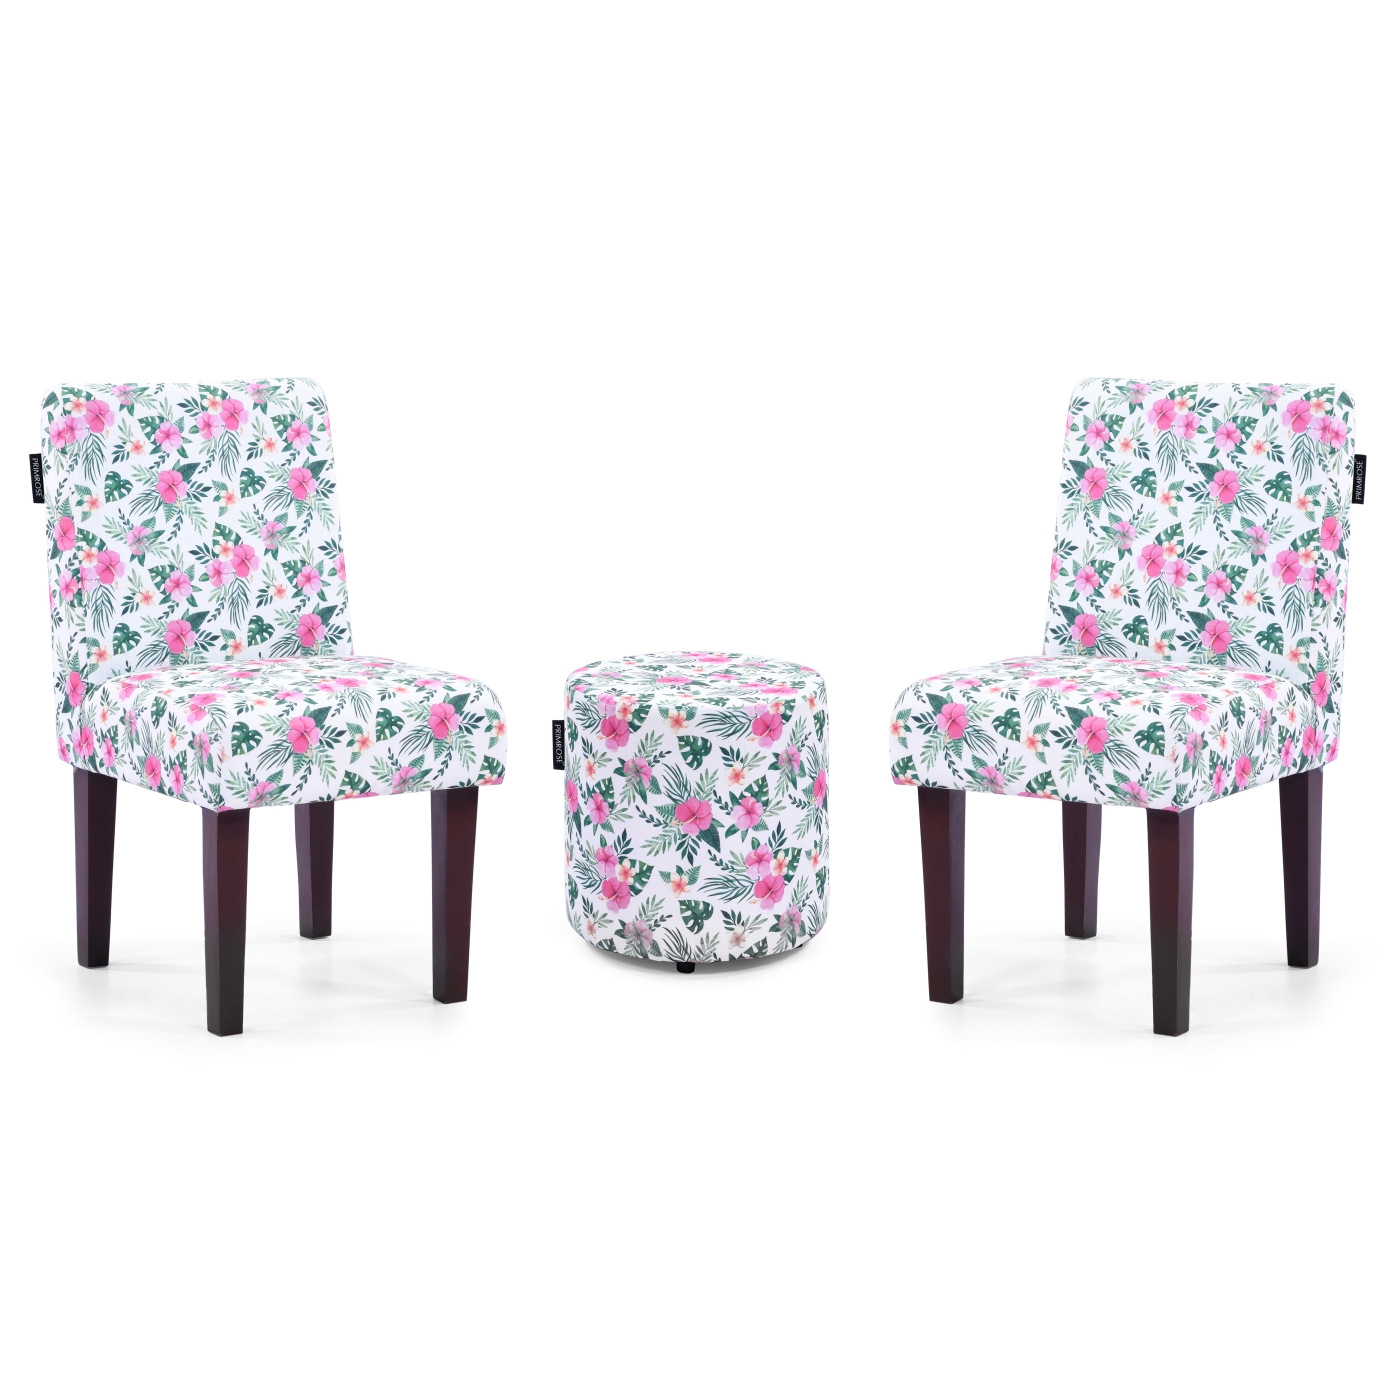 PRIMROSE Betty Hibiscus Floral Digital Printed Faux Linen Fabric Dining Chair Combo (2 Chair+1 Ottoman) - Pink, Green  